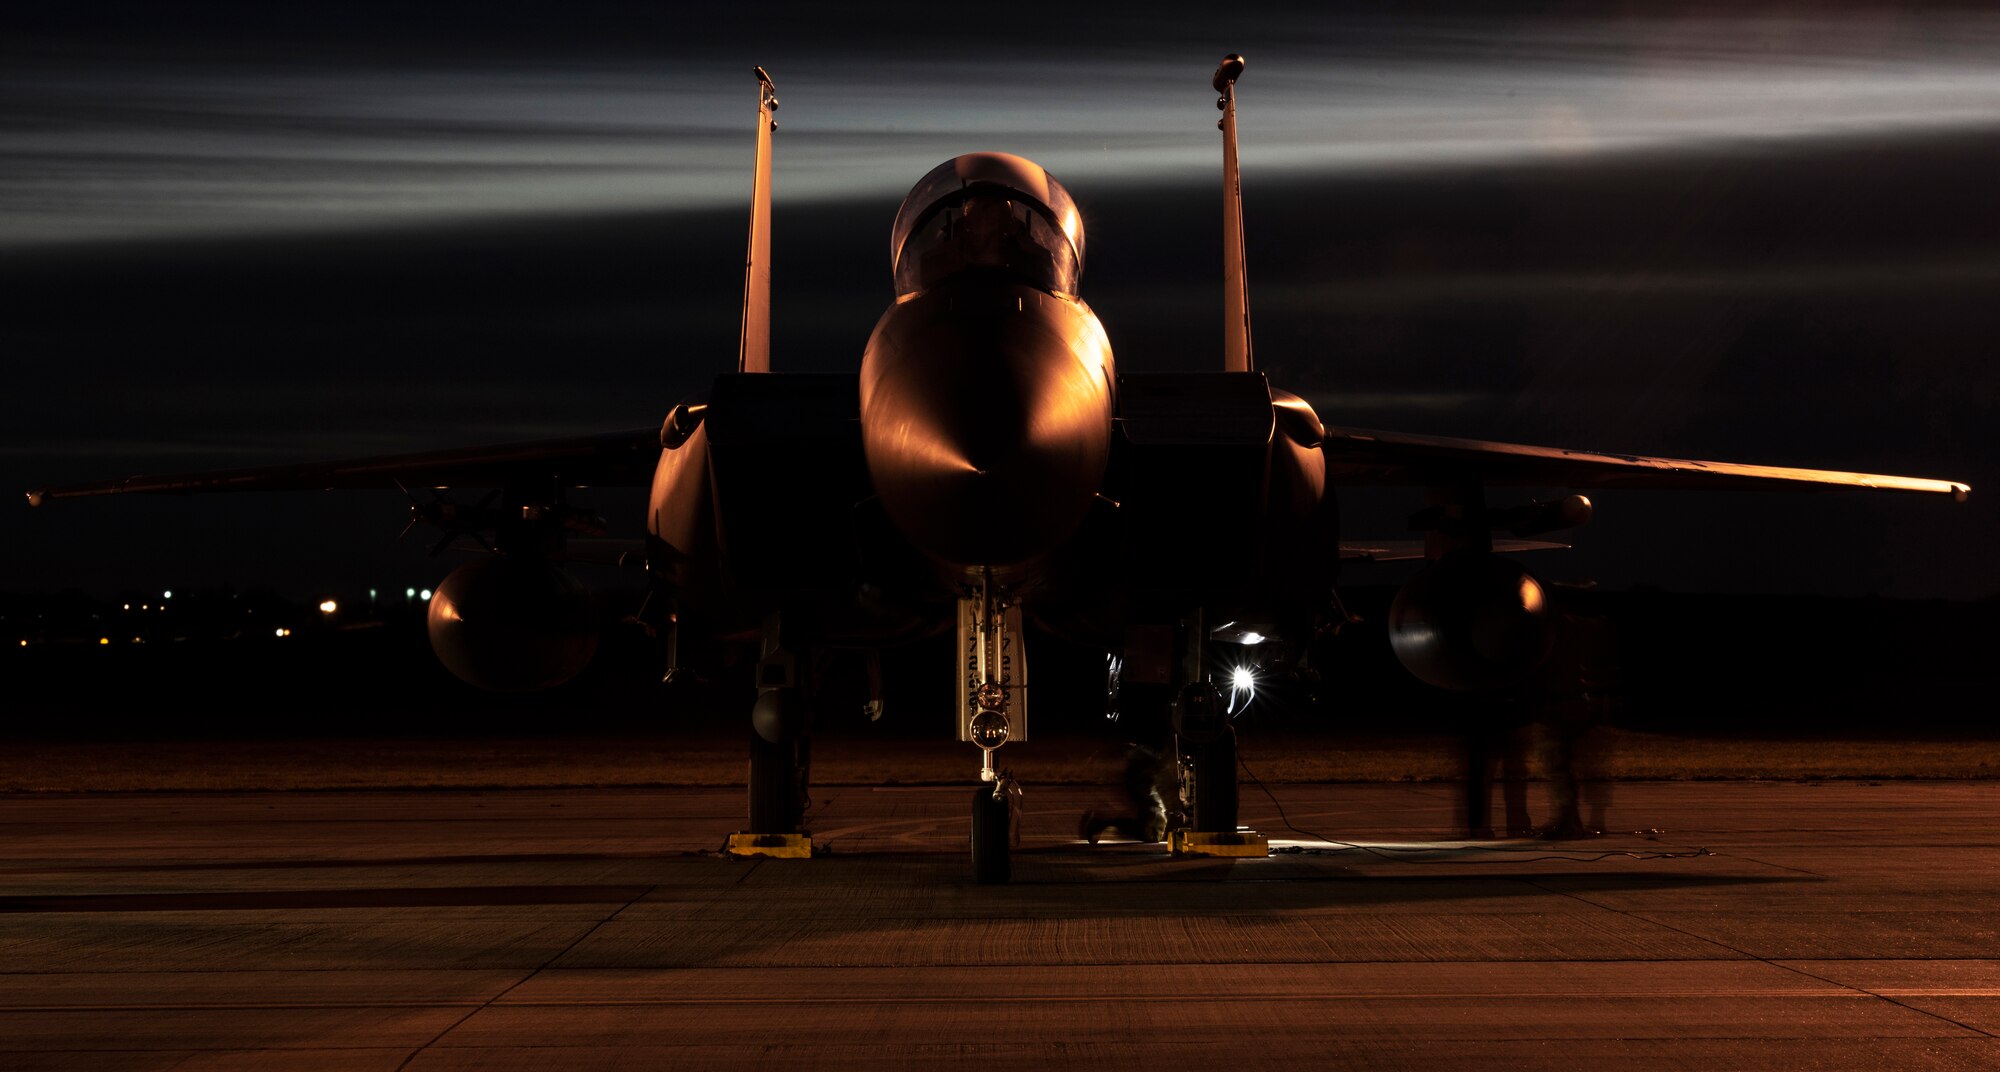 U.S. Air Force Airmen from the 48th Aircraft Maintenance Squadron perform pre-flight checks on an F-15E Strike Eagle during Agile Combat Employment training at Royal Air Force Lakenheath, England, Jan. 12, 2021. Exercising elements of ACE enables U.S. Air Forces in Europe to operate from locations with varying levels of capacity and support, ensuring Airmen and aircrews are postured to deliver lethal combat power across the spectrum of military operations. (U.S. Air Force photo by Airman 1st Class Jessi Monte)